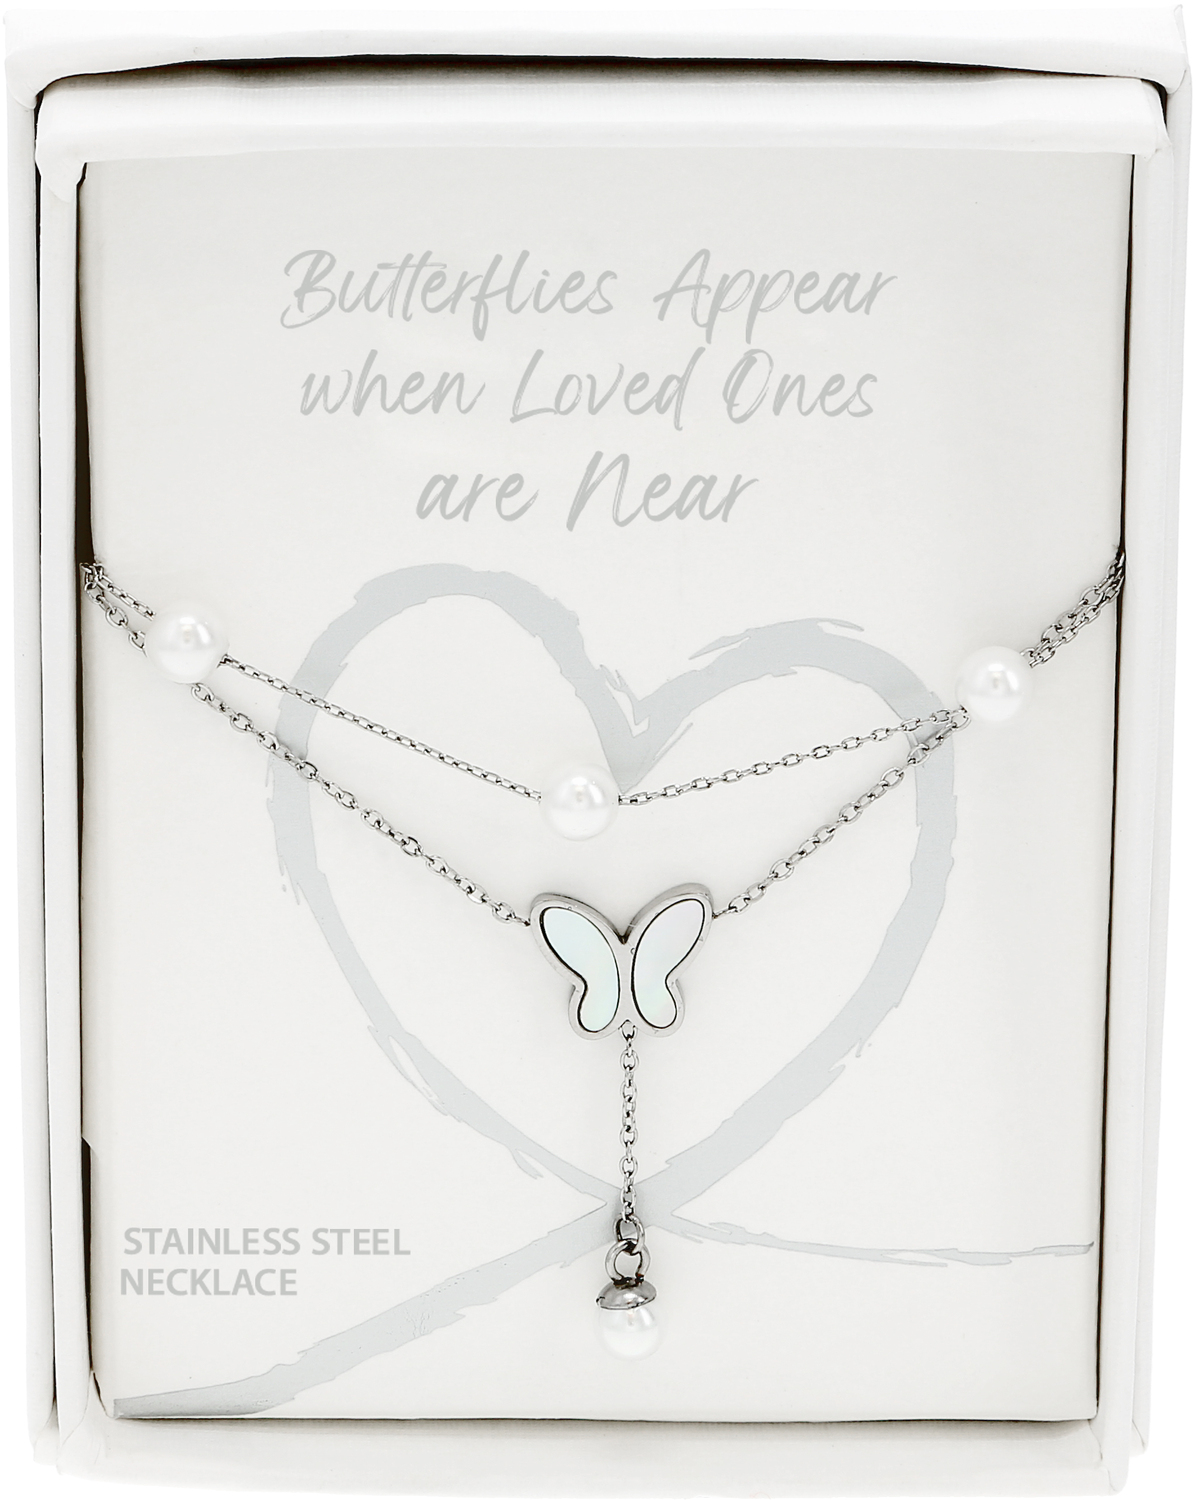 Butterflies Appear by Forever in our Hearts - Butterflies Appear - Stainless Steel Layered Necklace